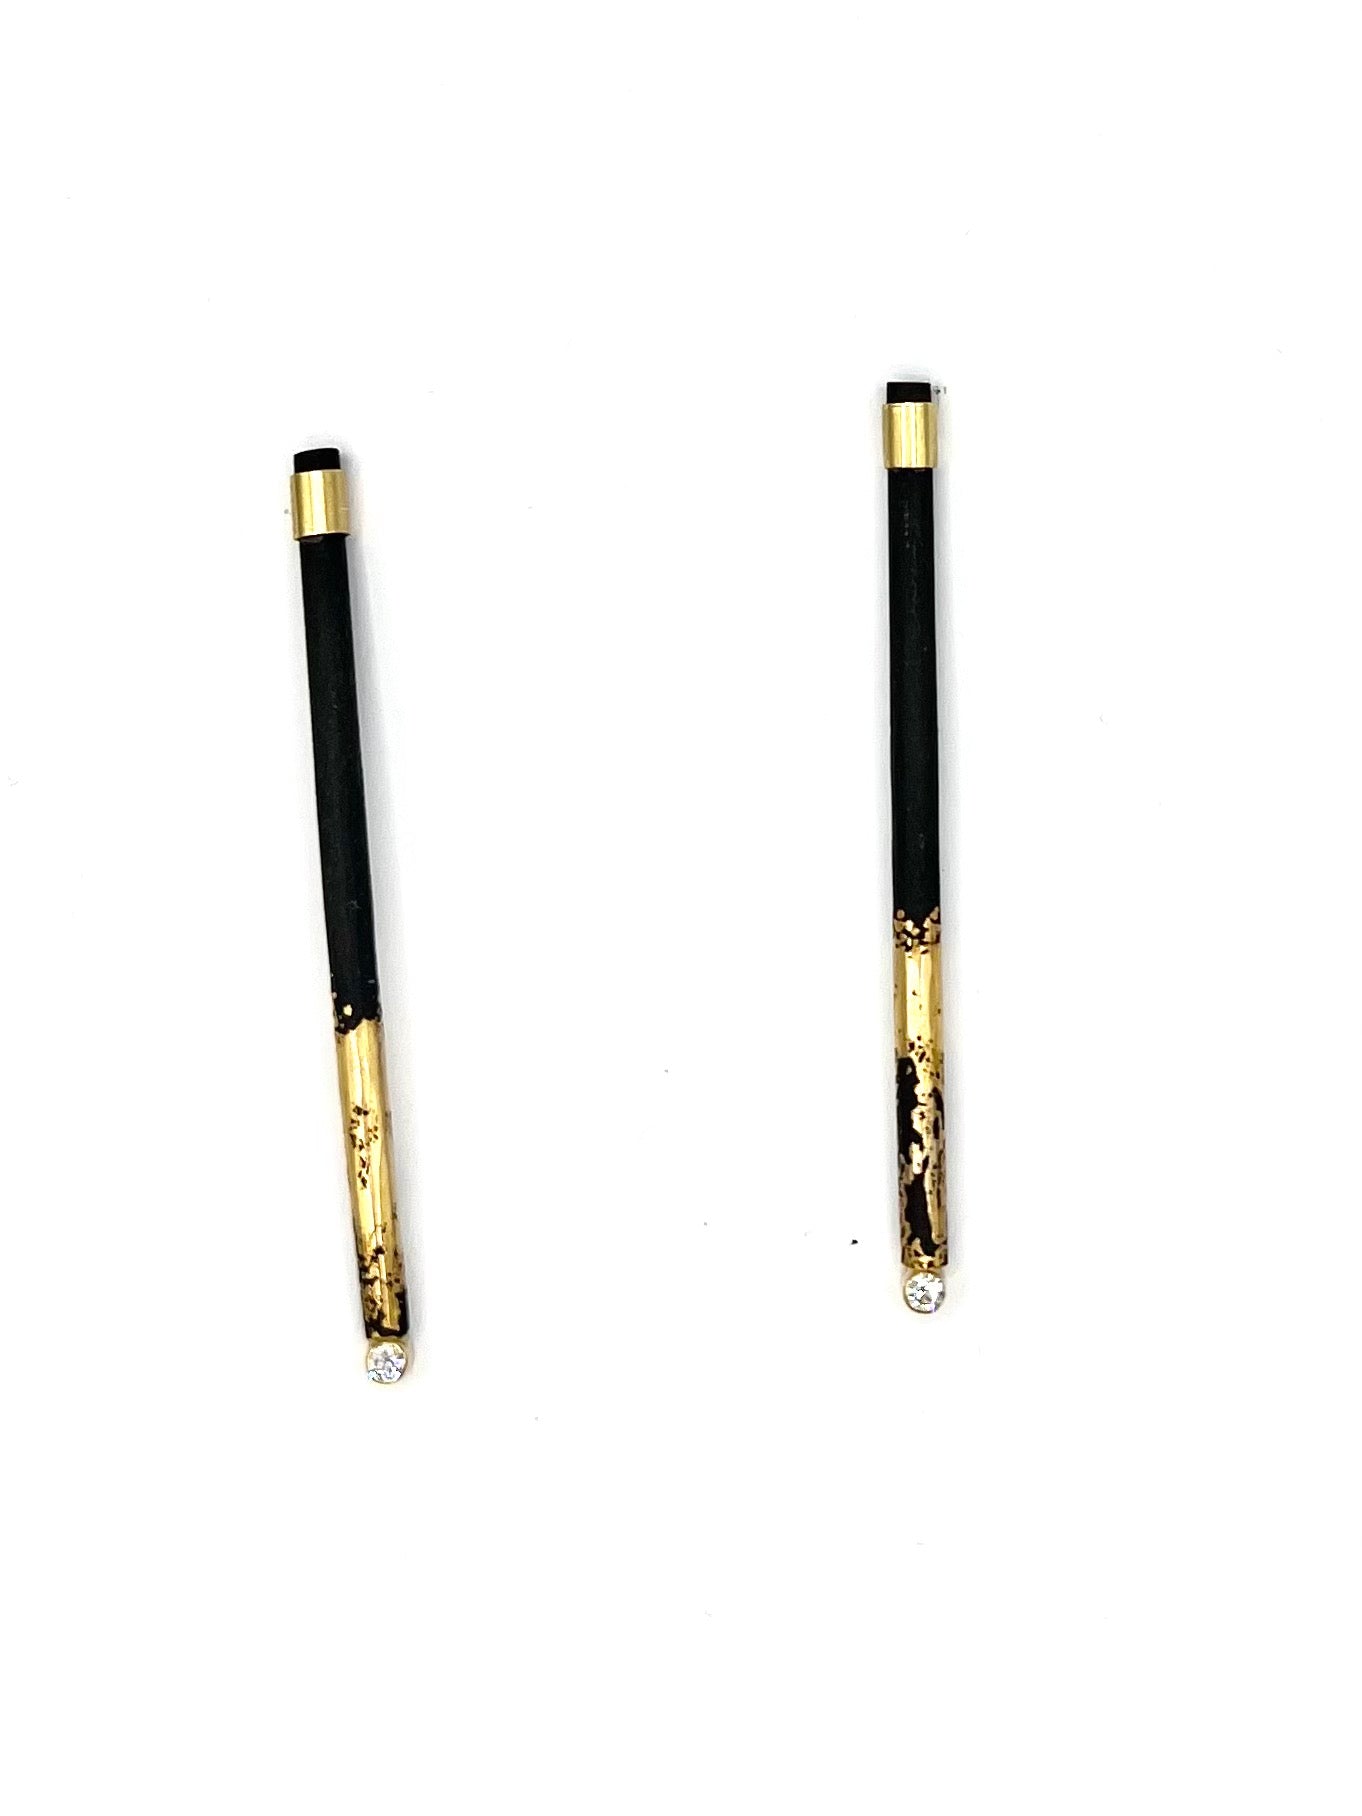 22k Gold and Iron with Diamonds Small Stick Earrings